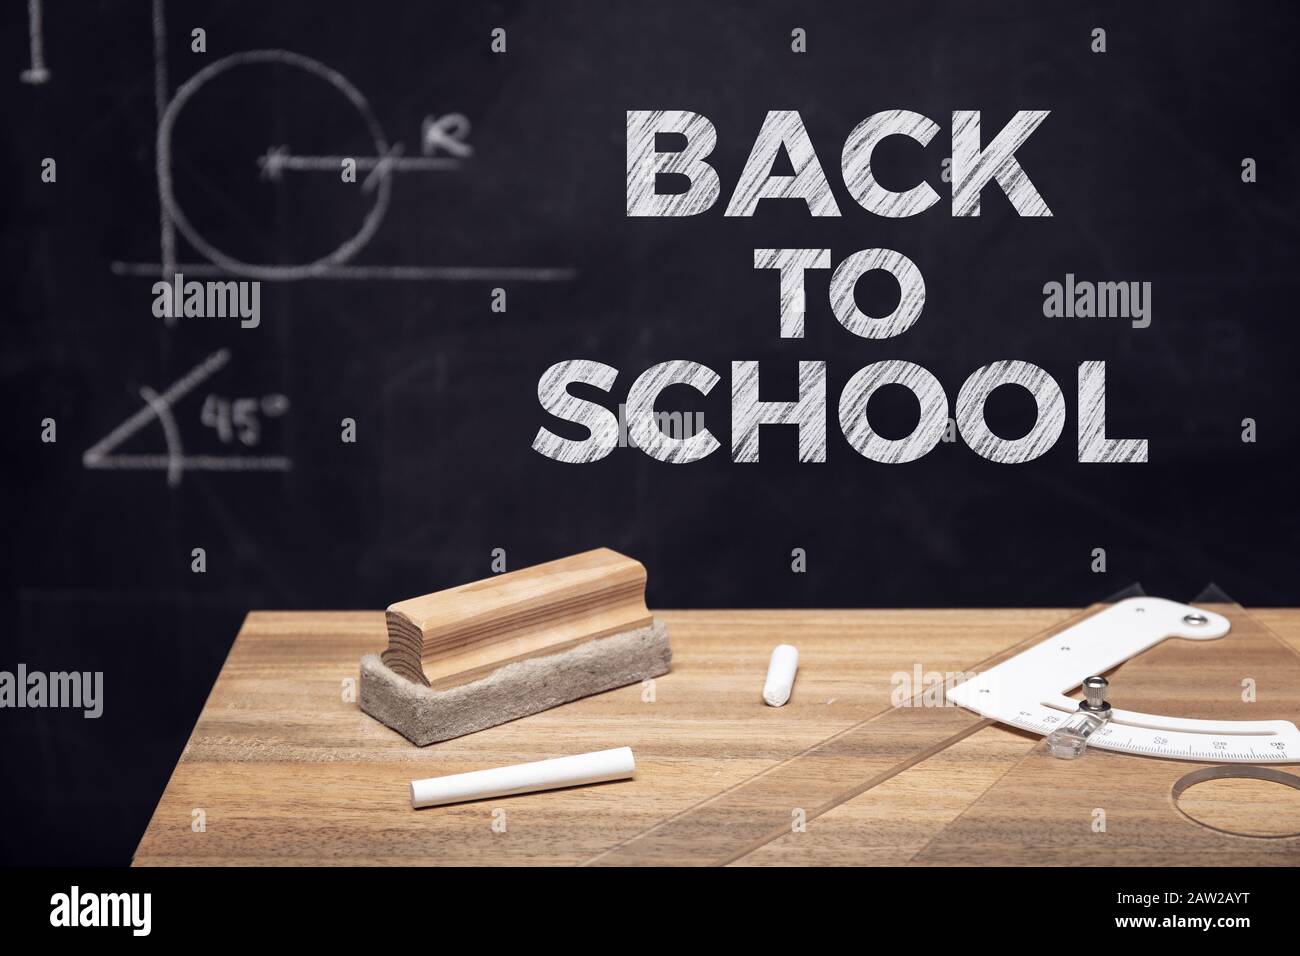 Back to school background. School table with chalk and eraser and a blackboard with geometric drawings in the chalkboard Stock Photo